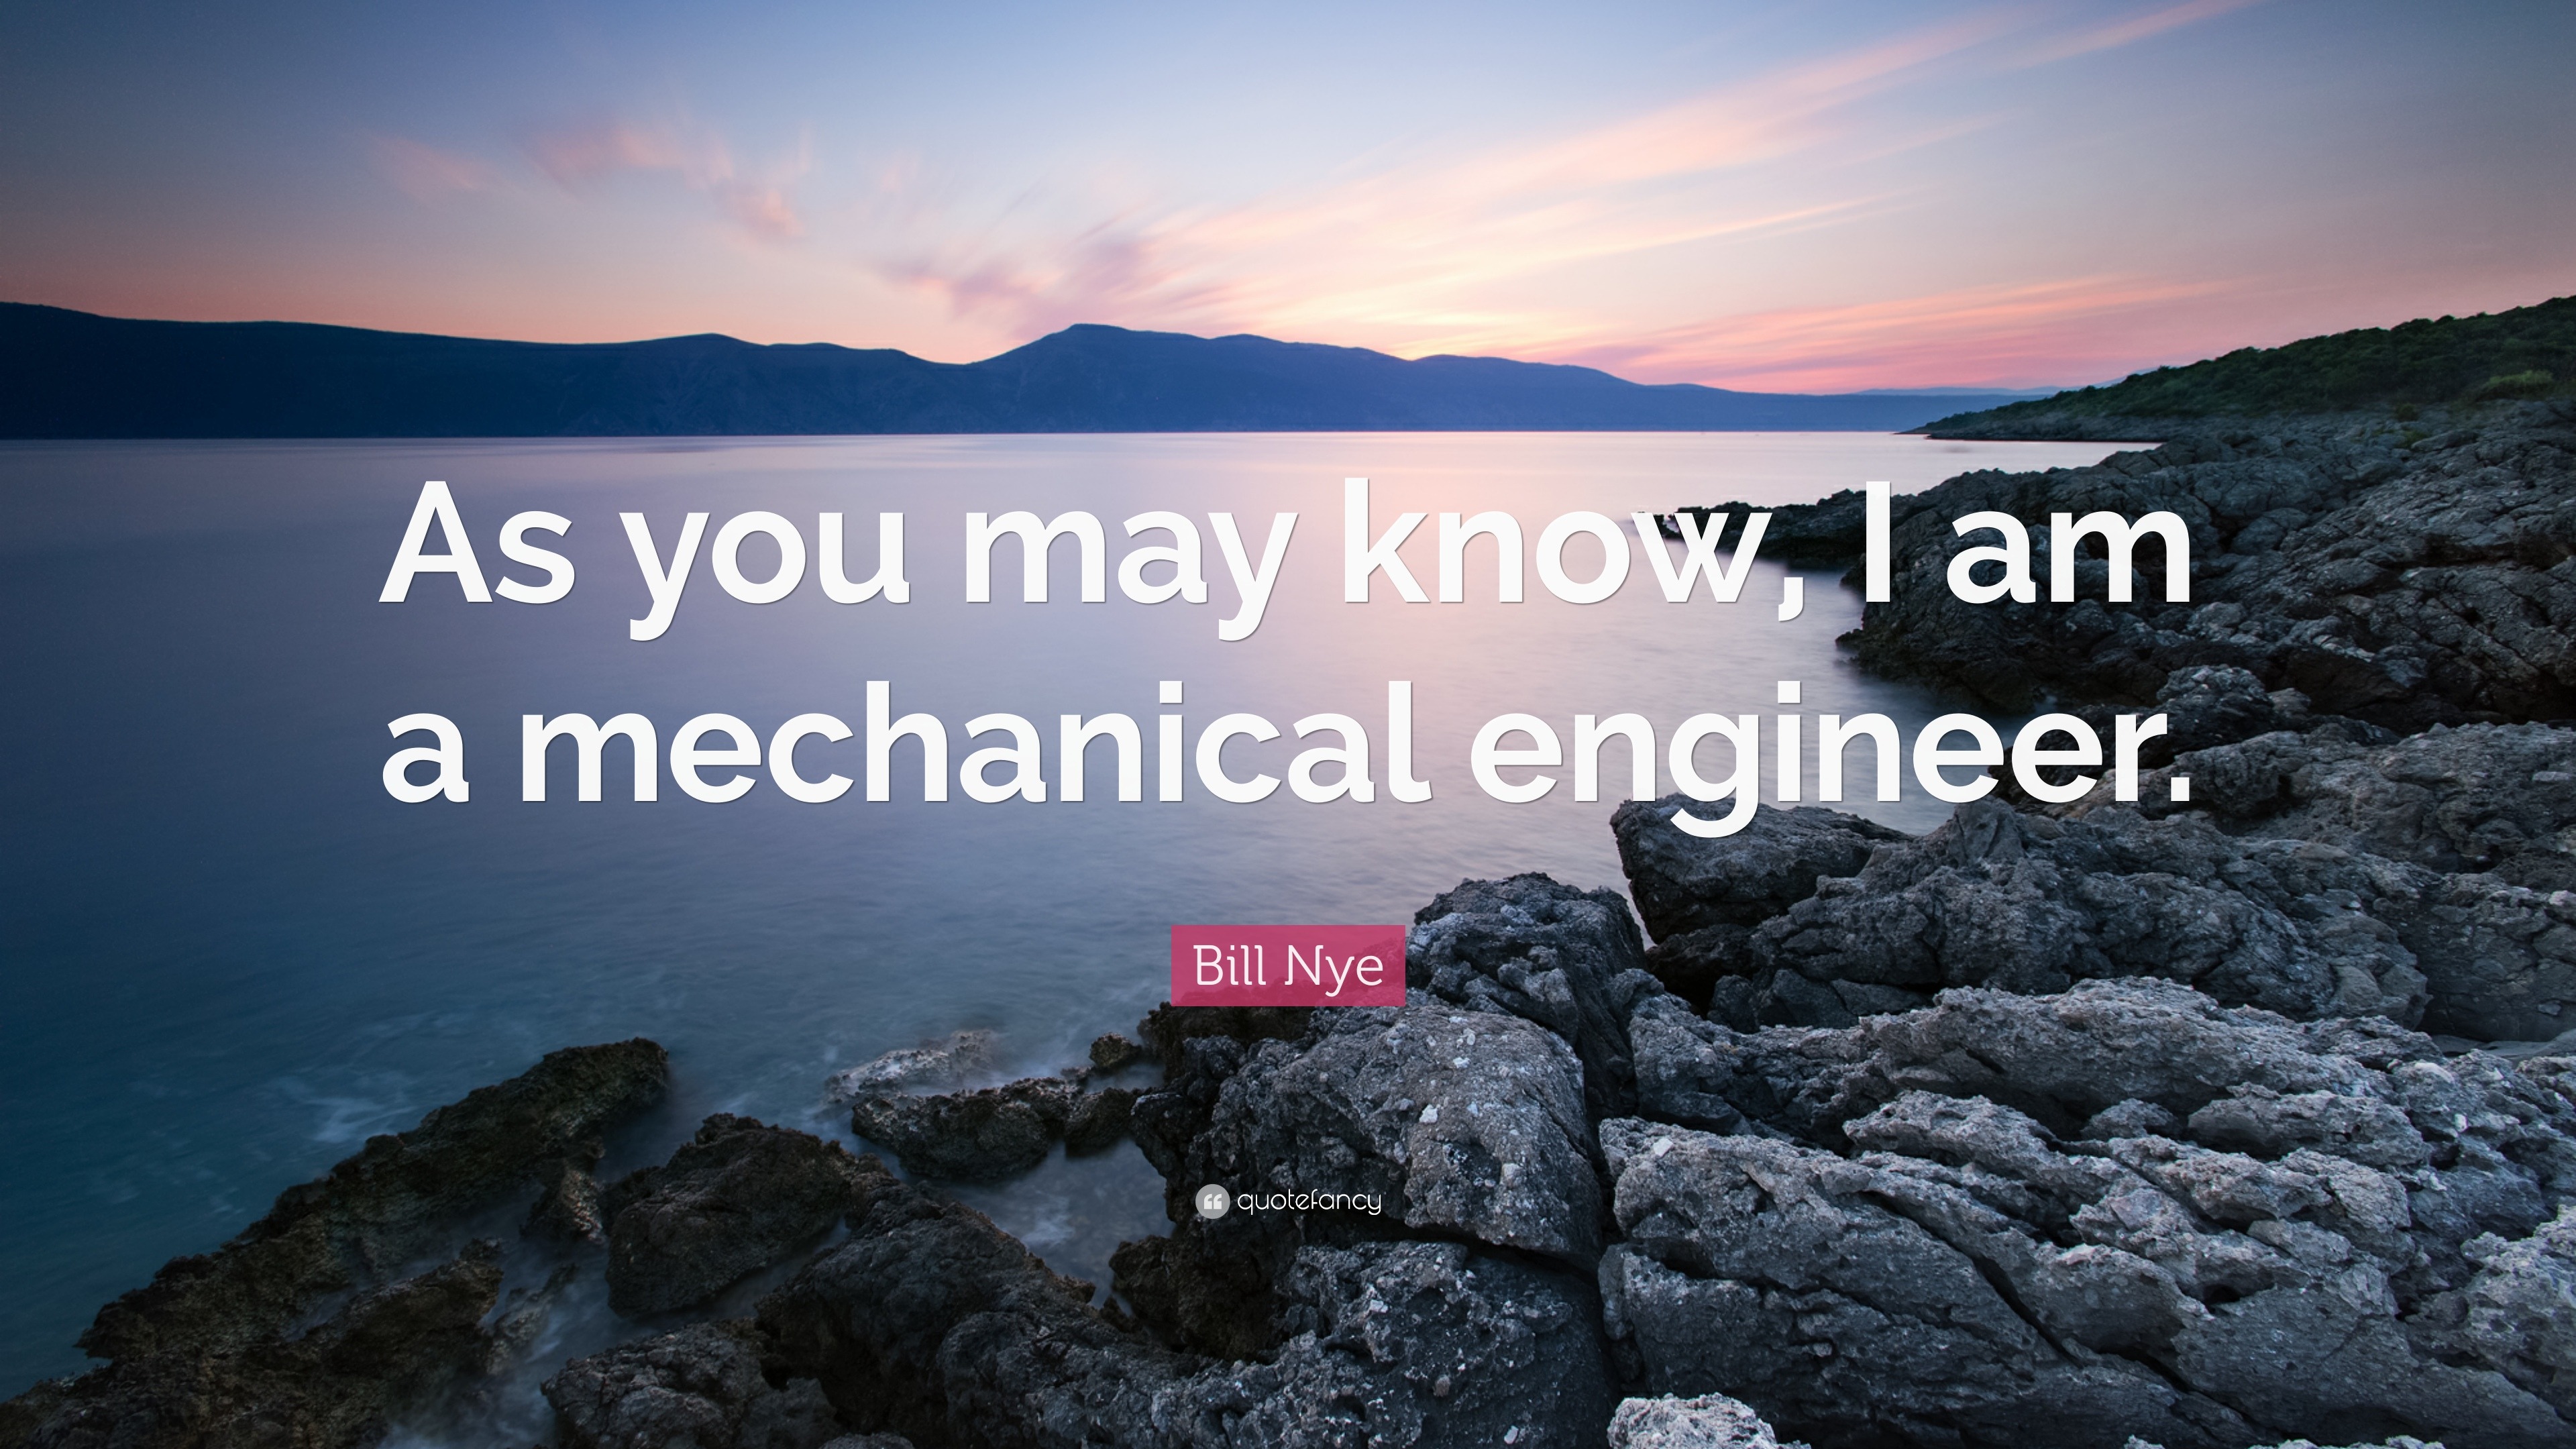 Bill Nye Quote: “As you may know, I am